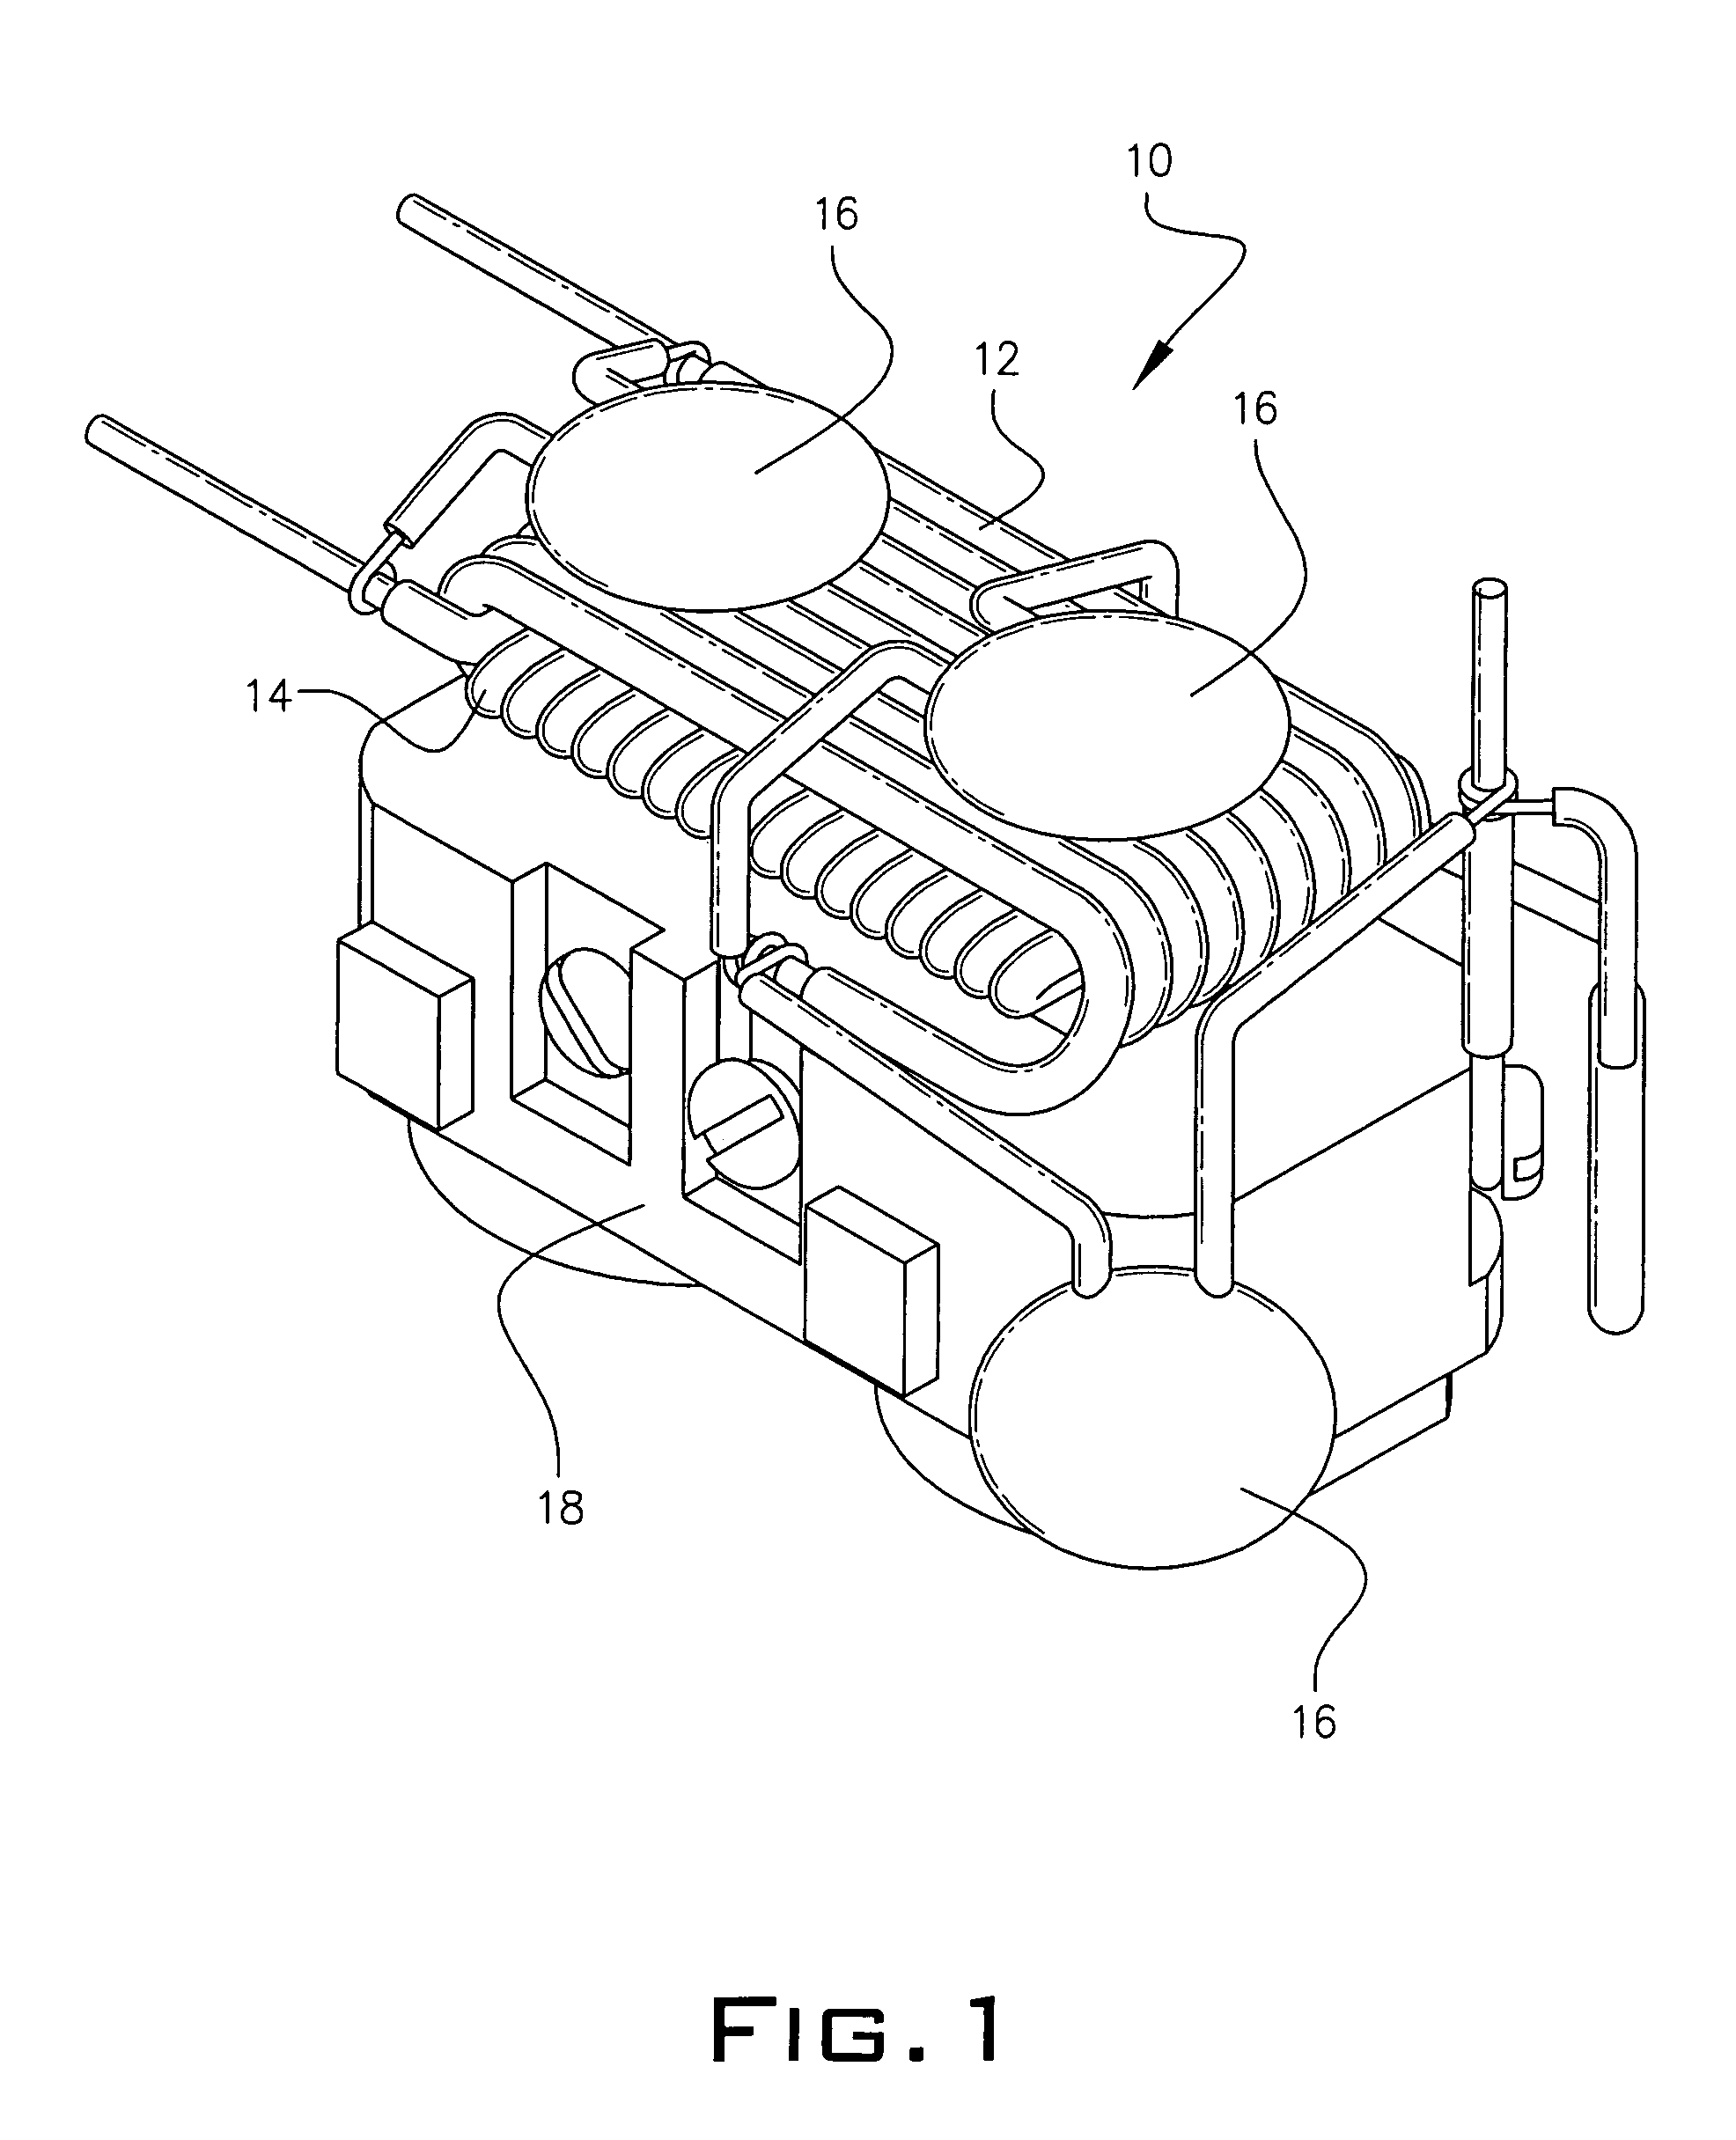 Non-ferrous surge biasing coil having multiple pairs of coils positioned at angles to one another